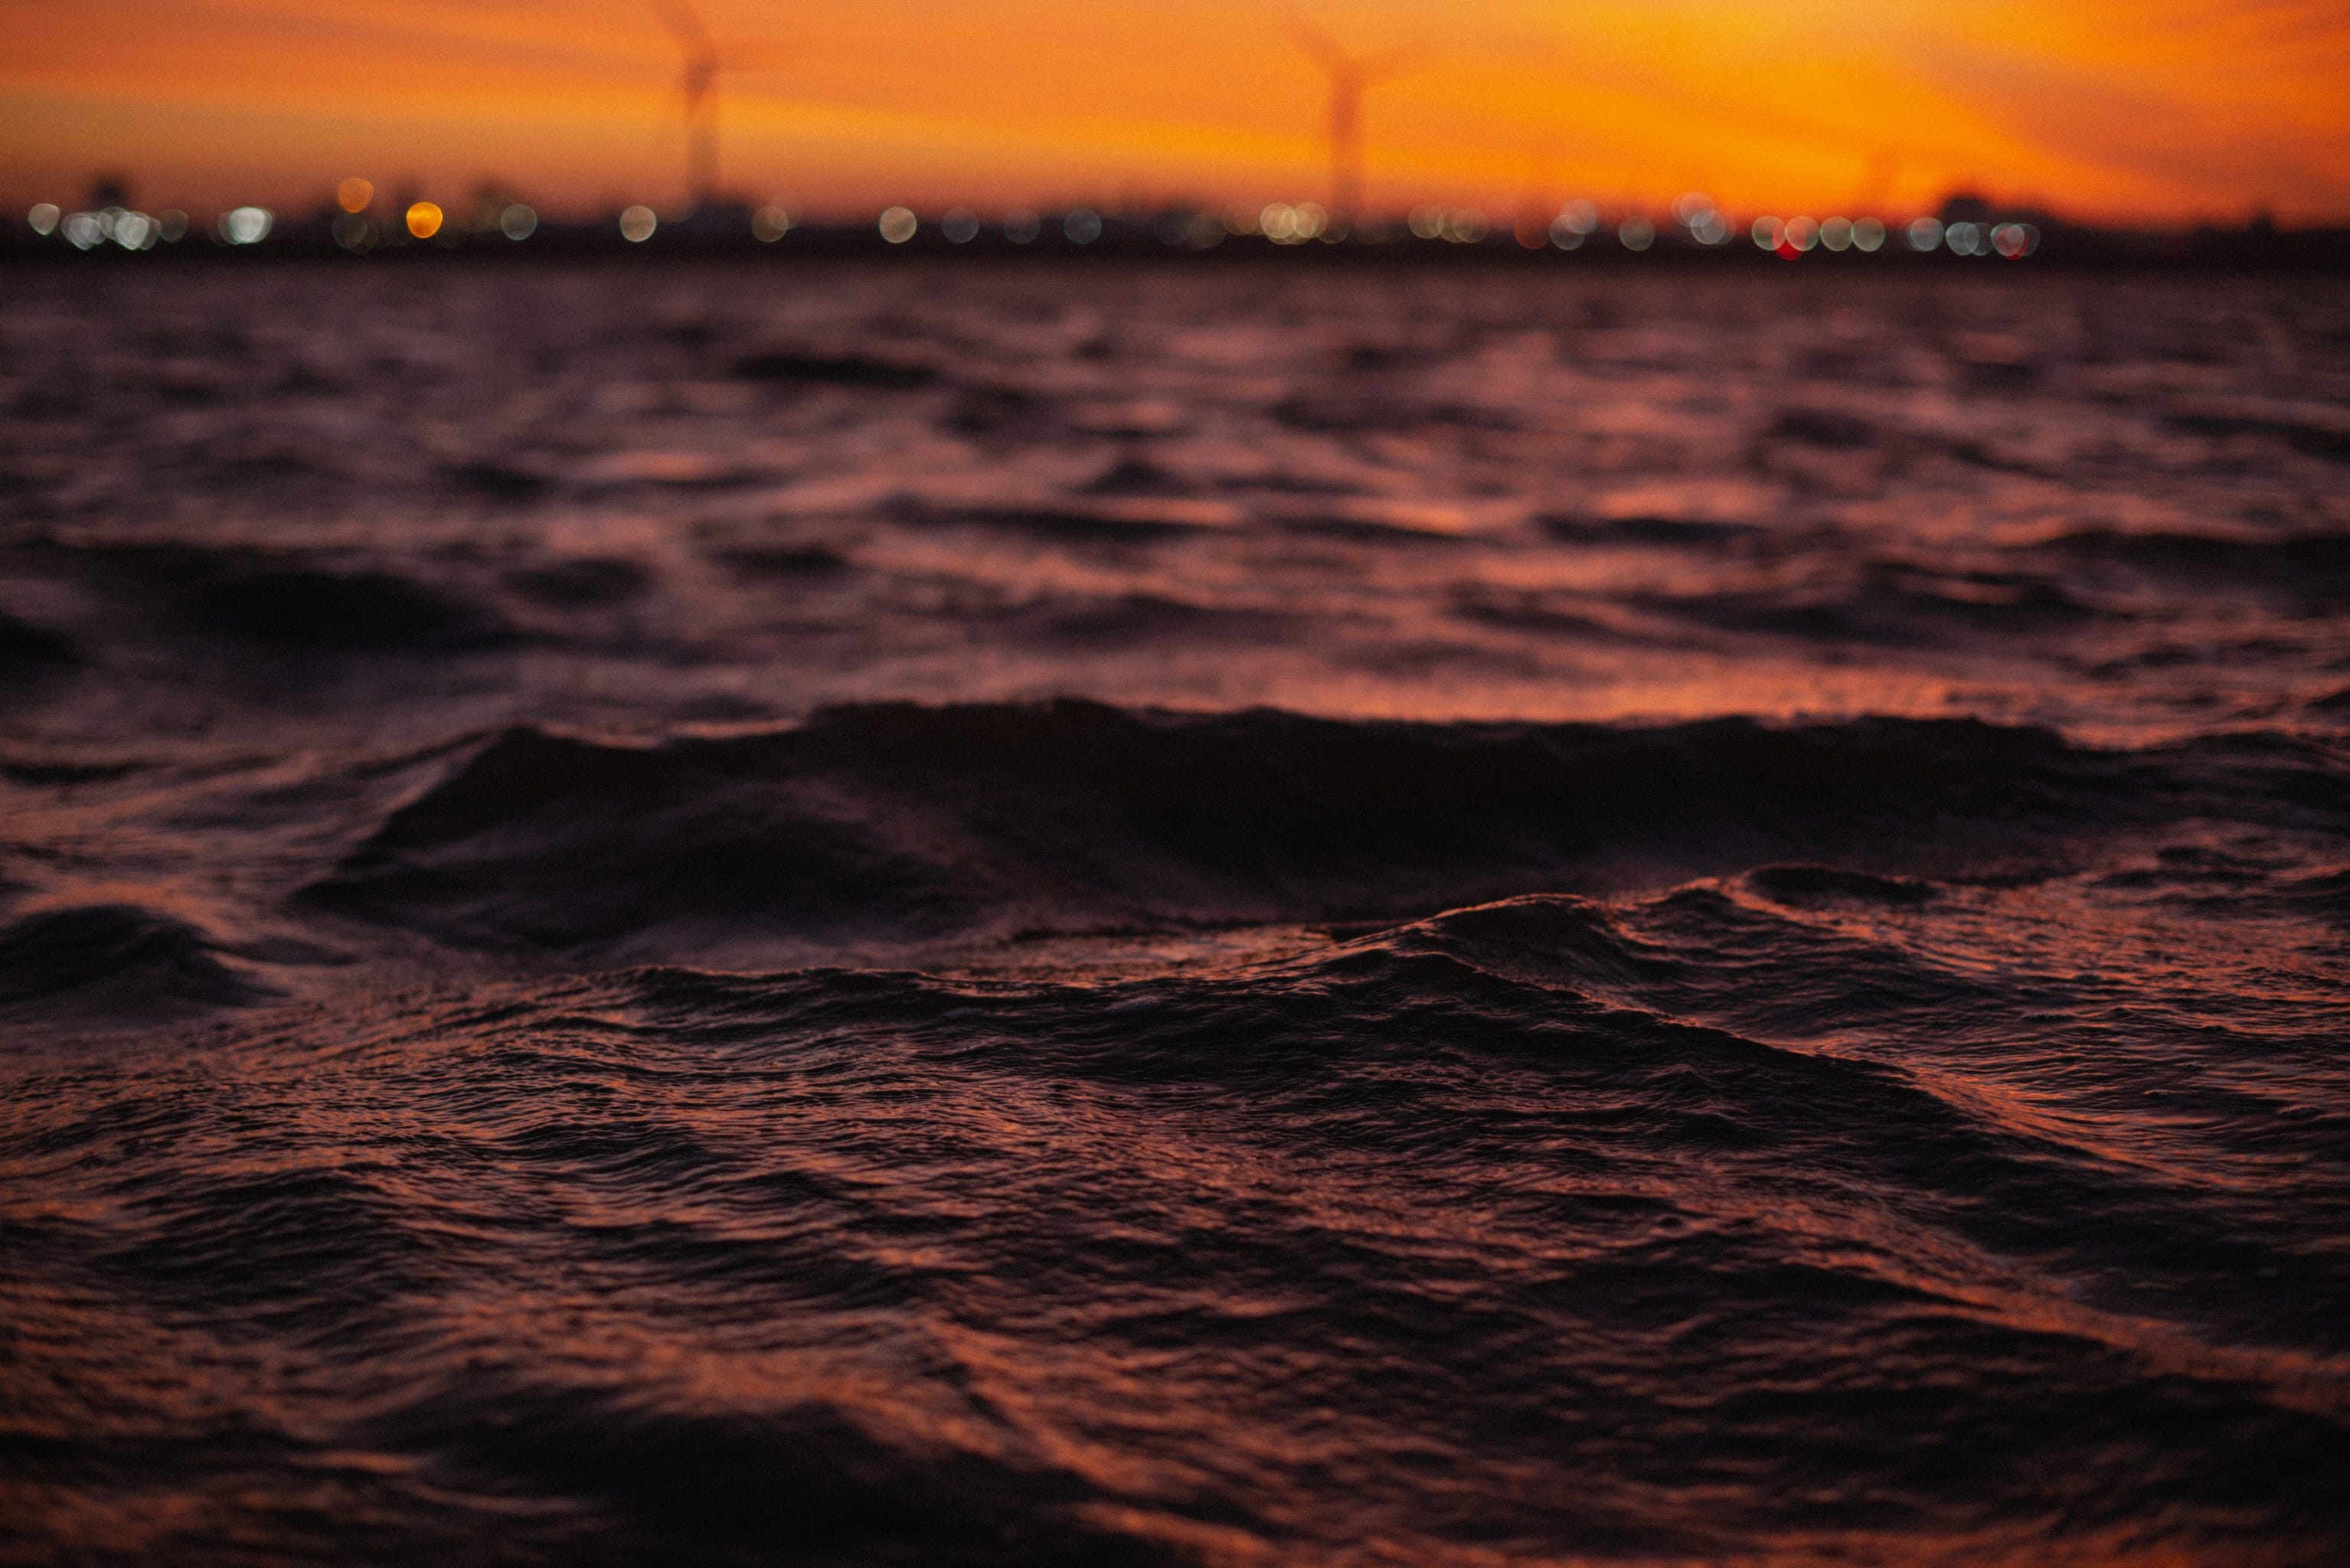 With a hint of the sky, sunrise is reflected in the choppy waves of the River Mersey